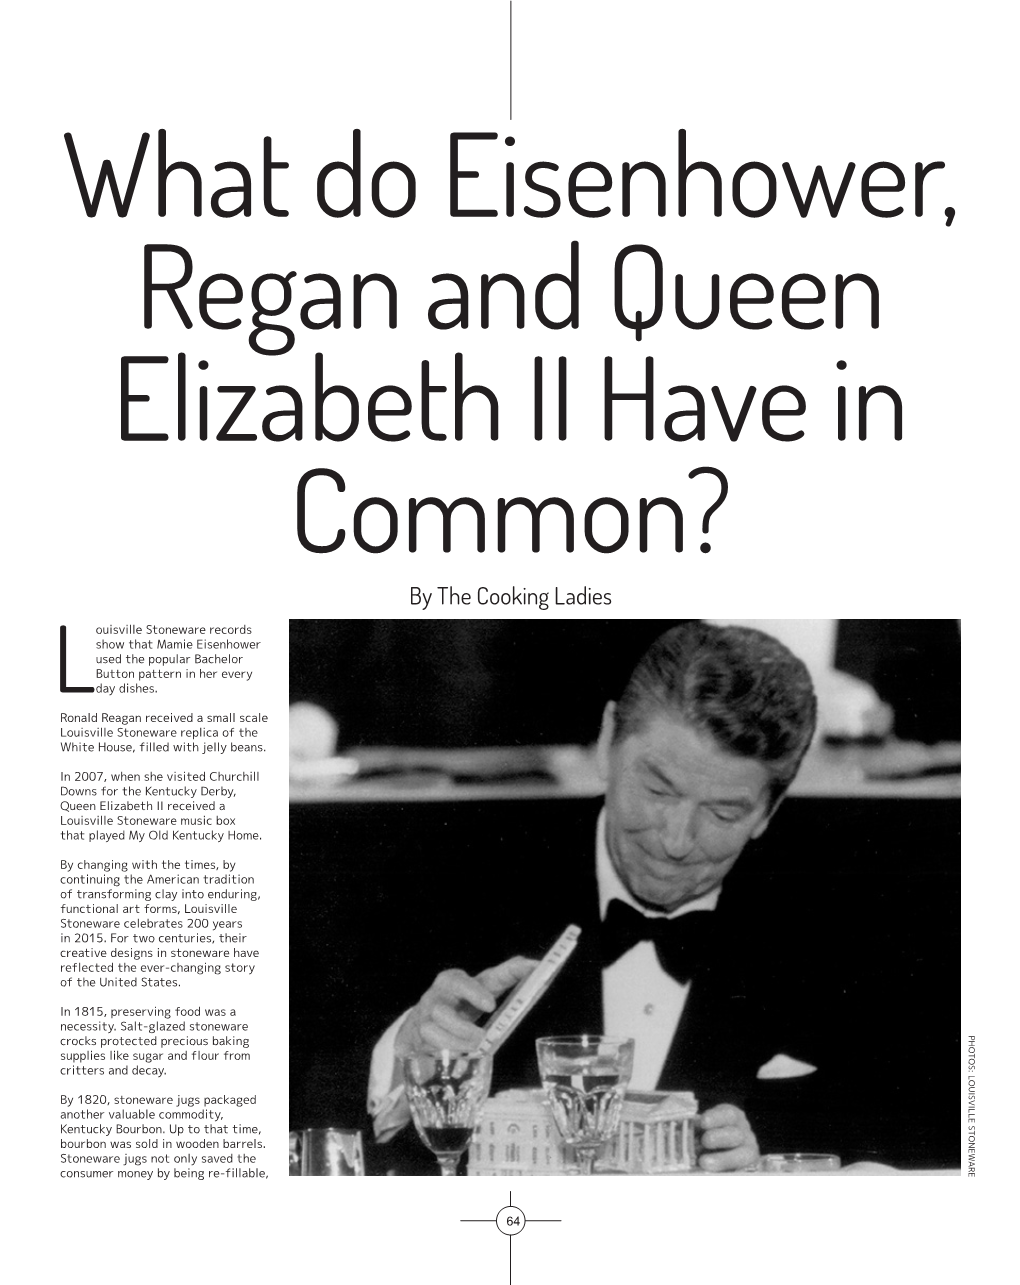 What Do Mamie Eisenhower, Ronald Reagan, And